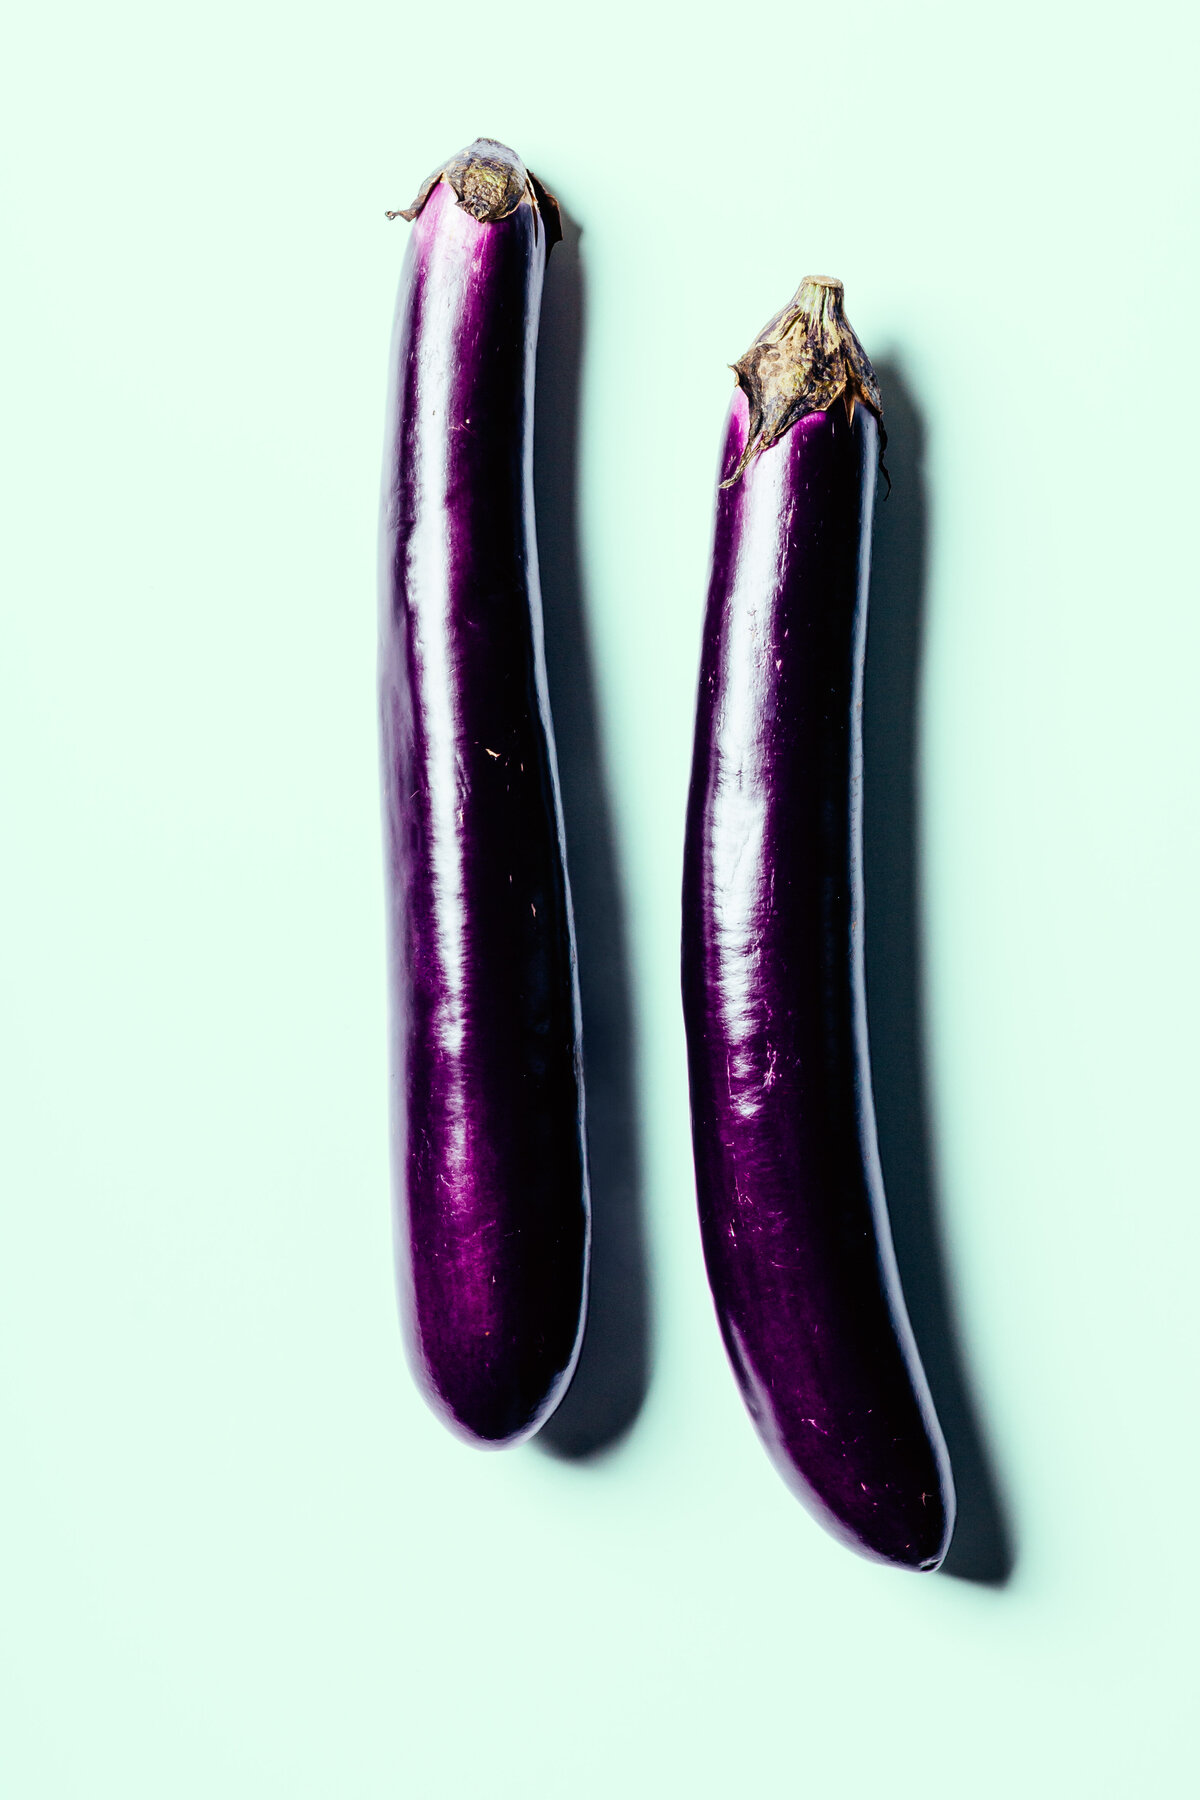 Japanese Aubergines Coloricious Food Photography